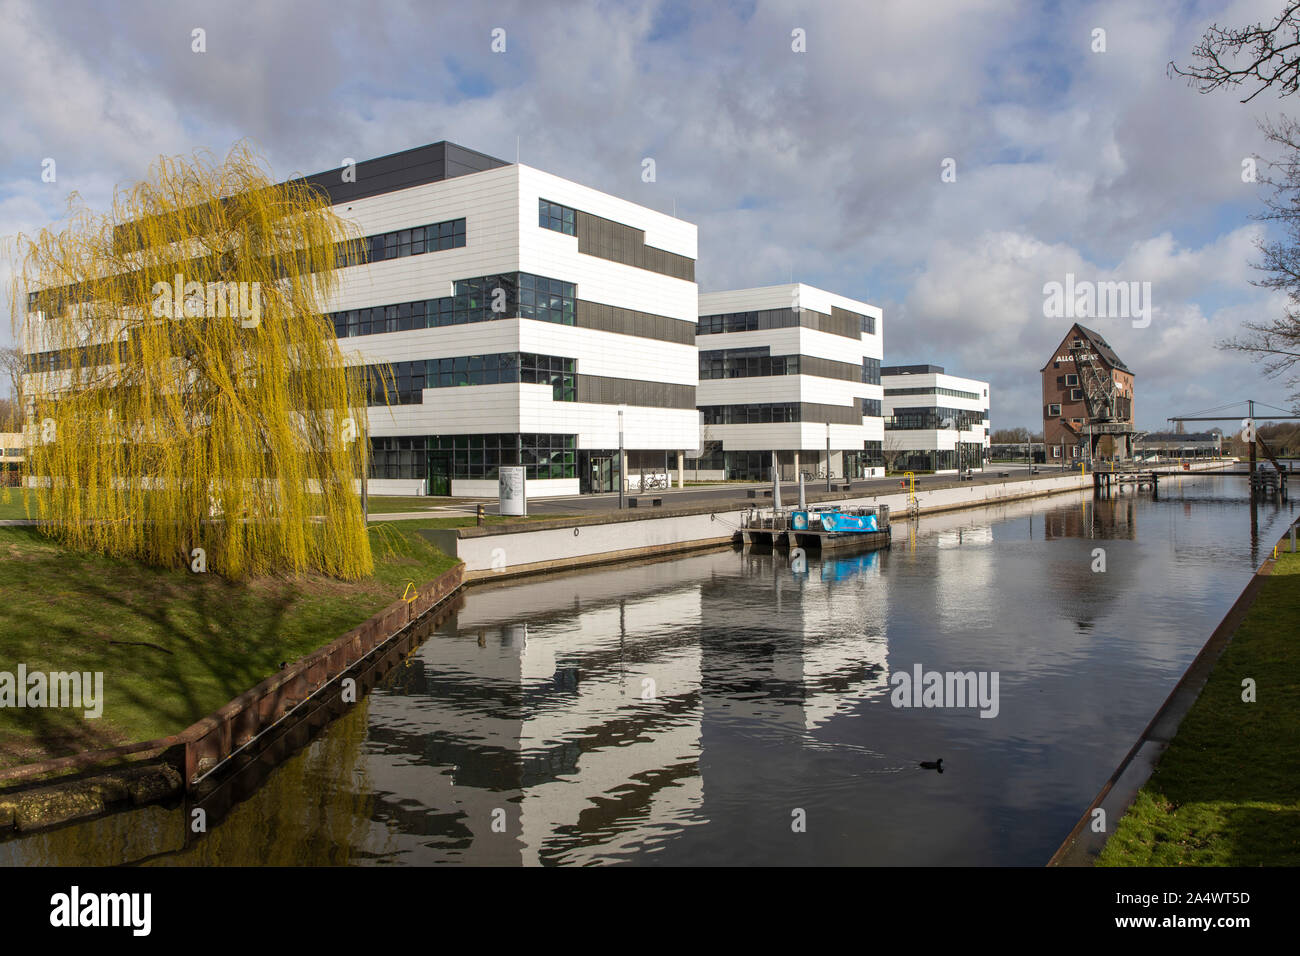 Kleve, Lower Rhine, NRW, Rhine-Waal University of Applied Sciences, Kleve campus, on the river Spoy, Spoycanal, former granary, now used as a knowledg Stock Photo